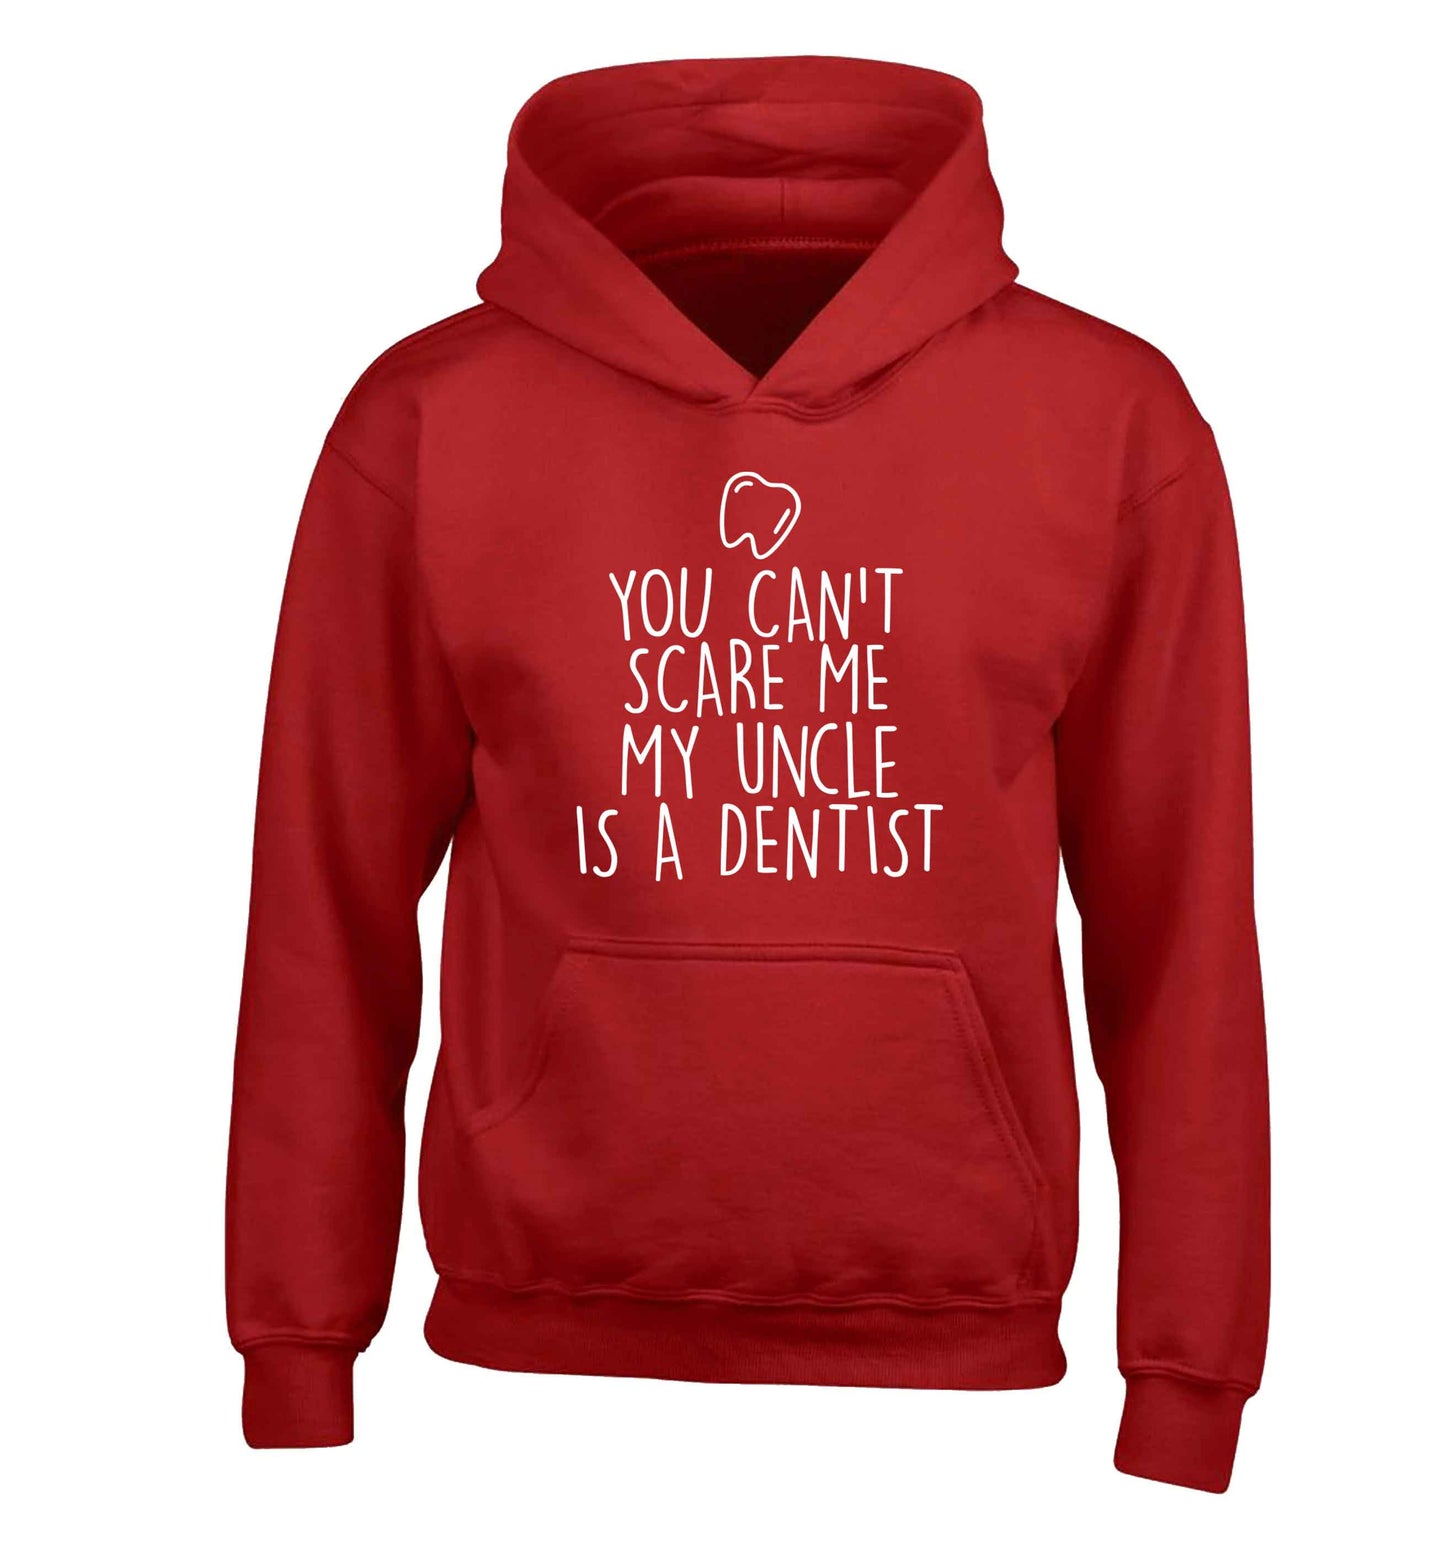 You can't scare me my uncle is a dentist children's red hoodie 12-13 Years